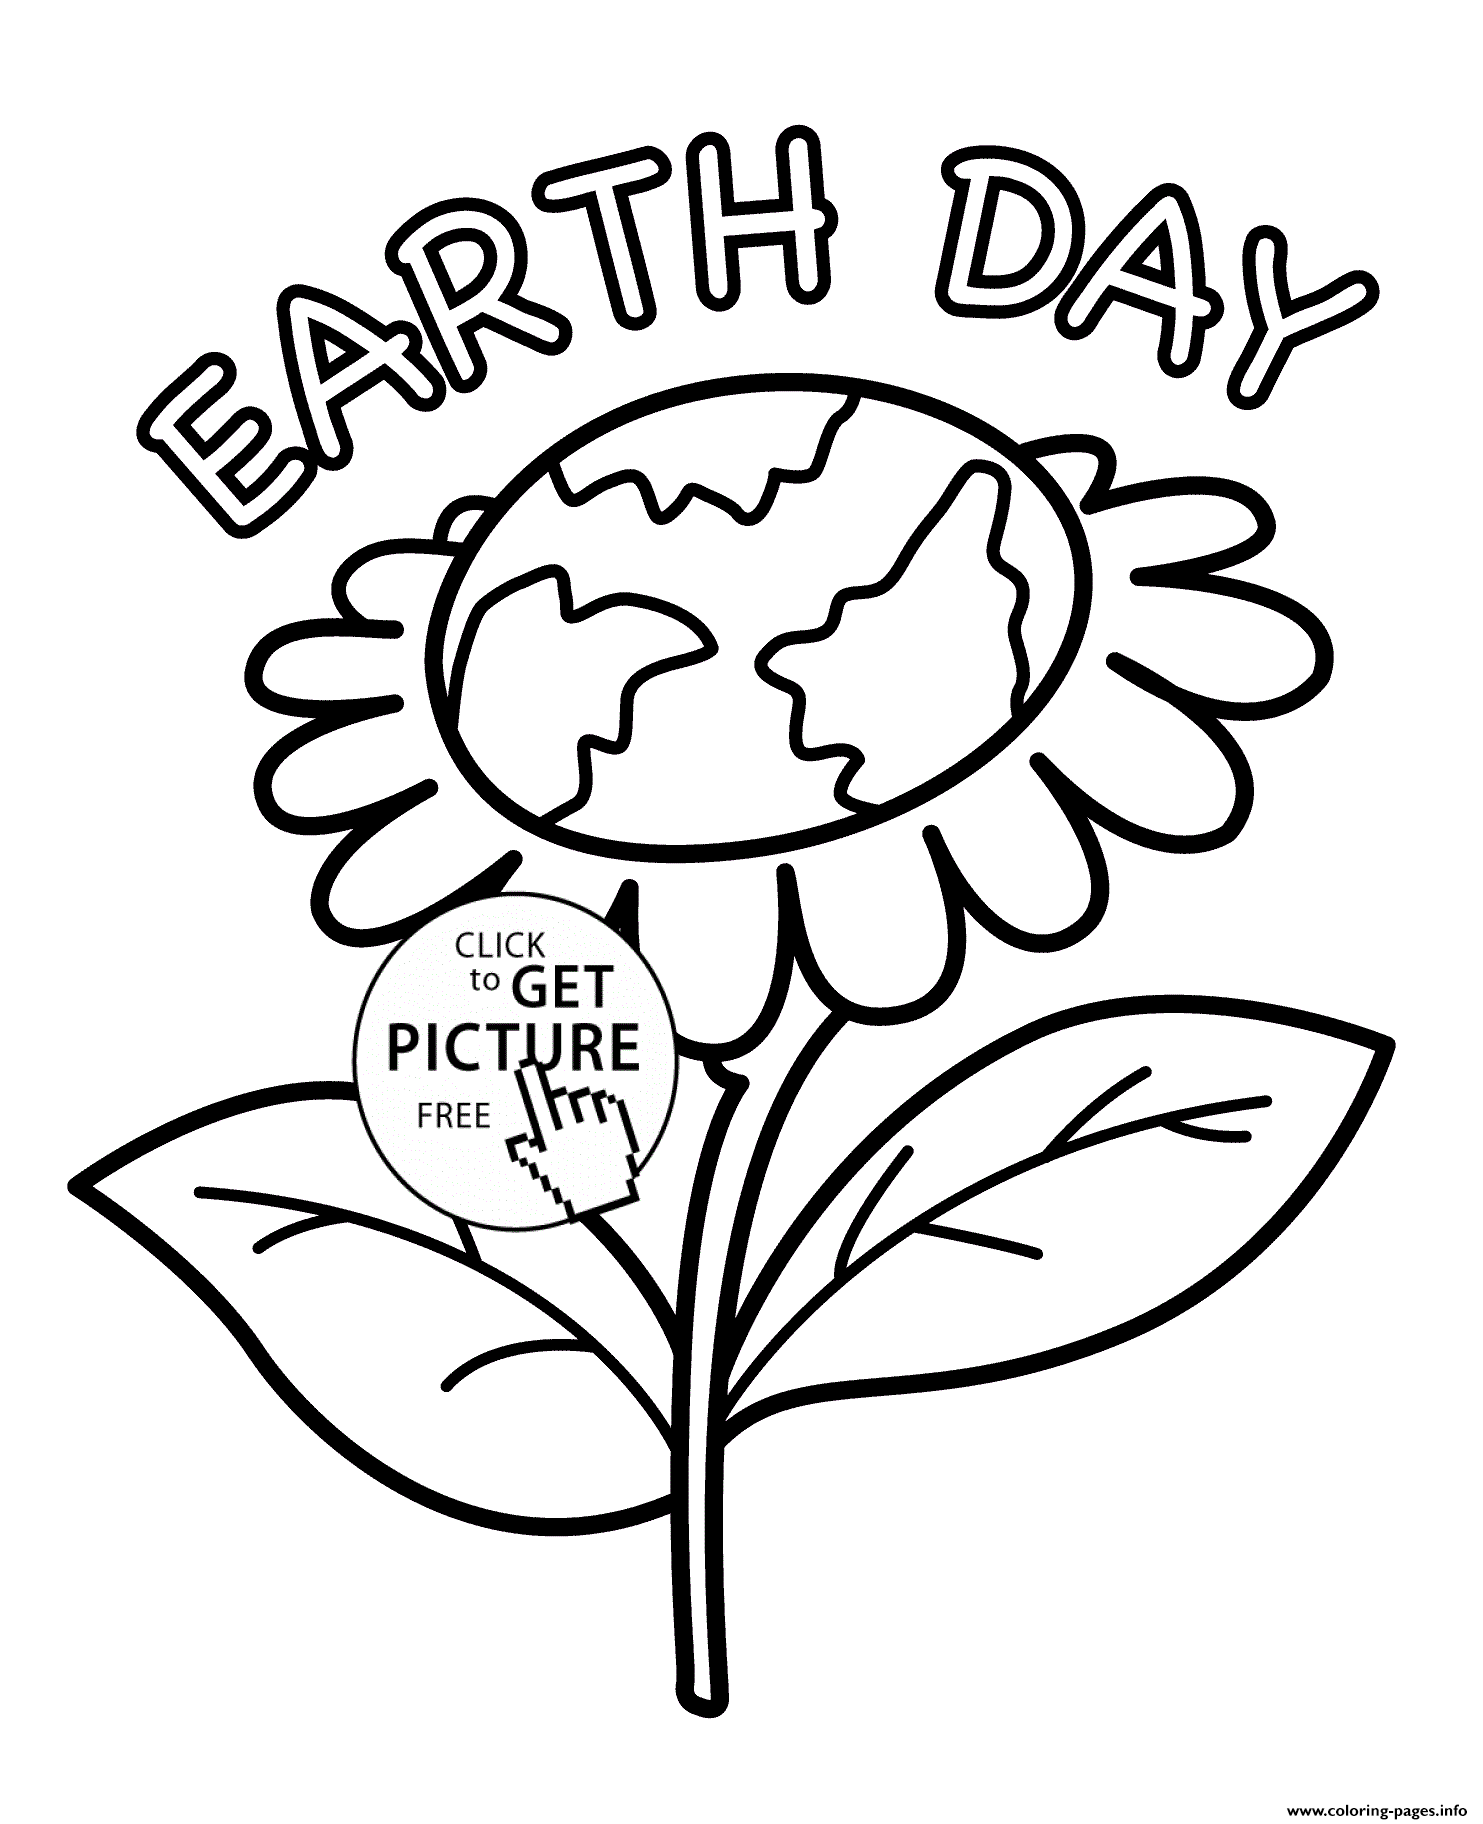 Earth Day Flower coloring